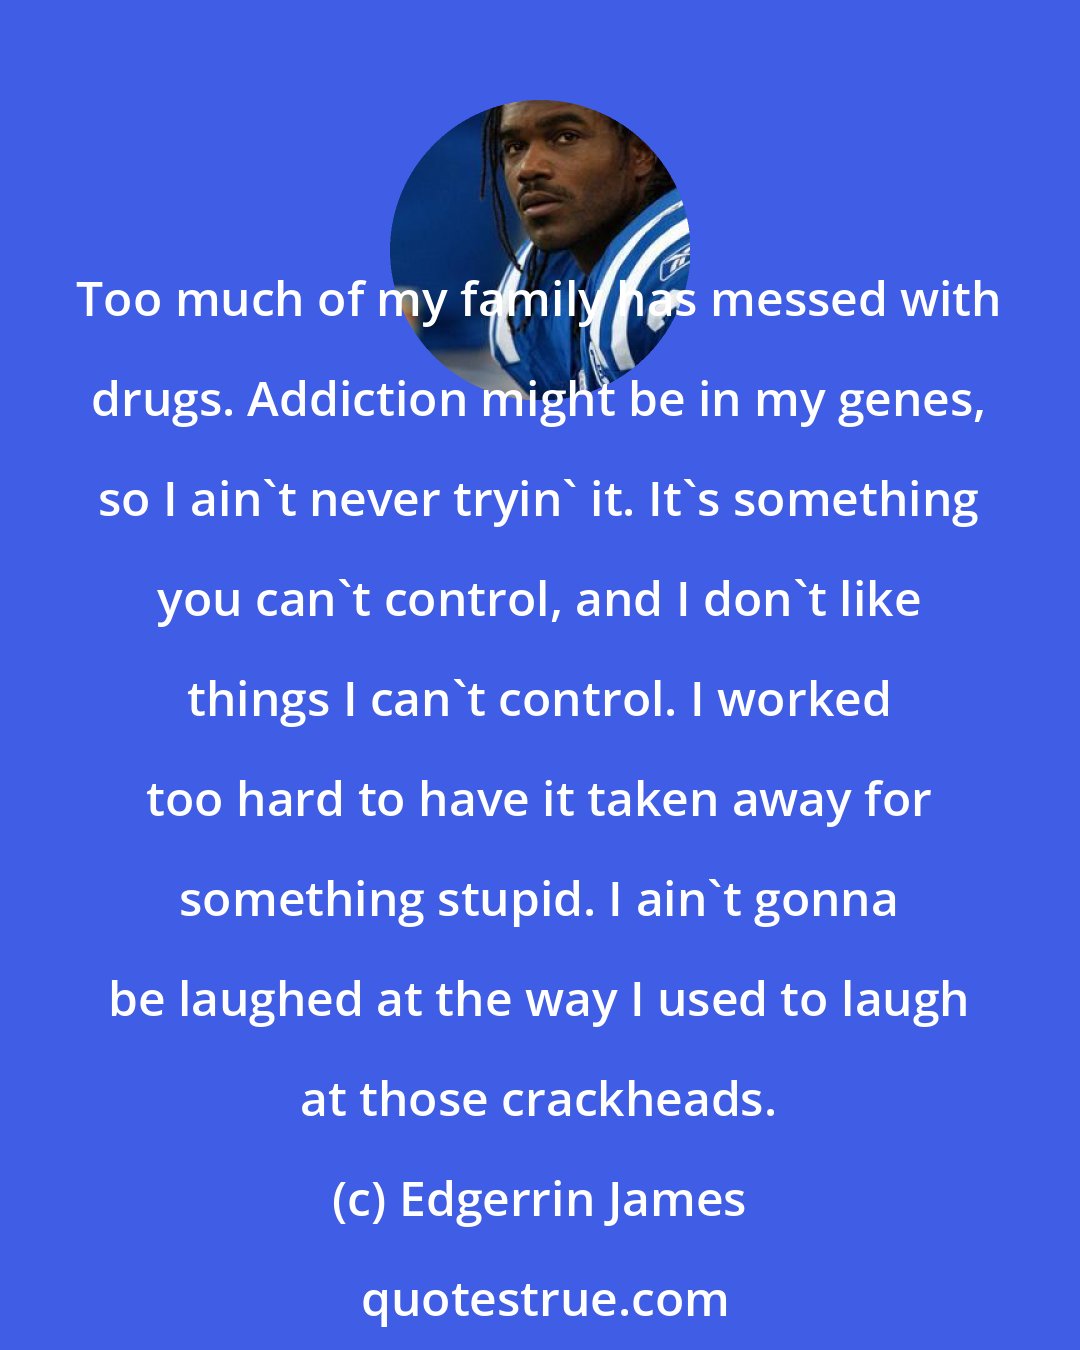 Edgerrin James: Too much of my family has messed with drugs. Addiction might be in my genes, so I ain't never tryin' it. It's something you can't control, and I don't like things I can't control. I worked too hard to have it taken away for something stupid. I ain't gonna be laughed at the way I used to laugh at those crackheads.